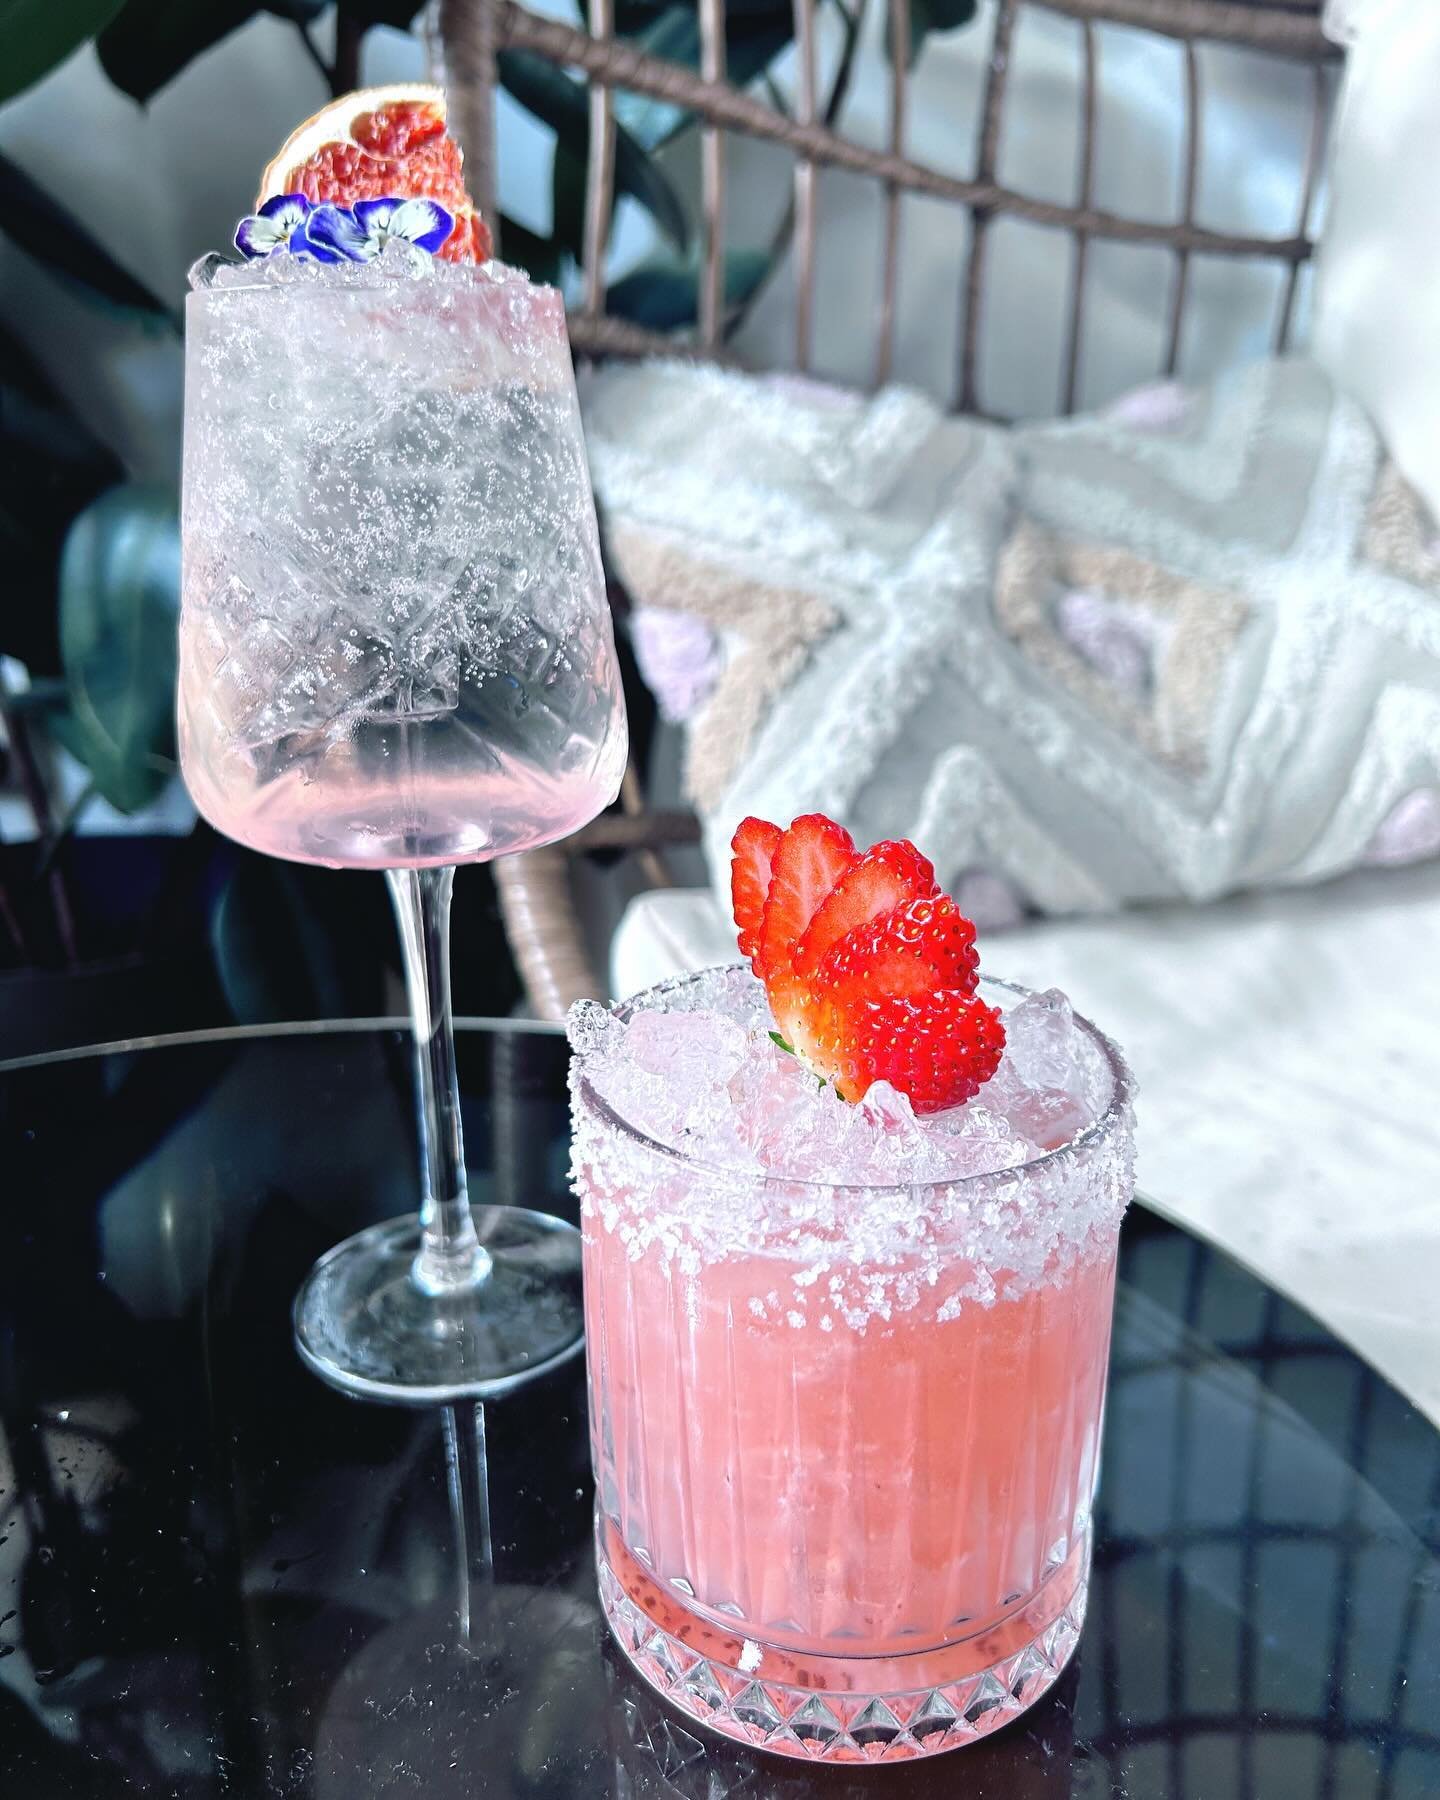 Be sure to shout mum one of our fabulous cocktails or mocktails this weekend. 

Why not try a strawberry MUMMA-Garita or Belle Spritz with rose, limoncello &amp; DalZotto Prosecco 

⭐️Available all weekend. 
🌸Book now for Mother&rsquo;s Day 

Feed y